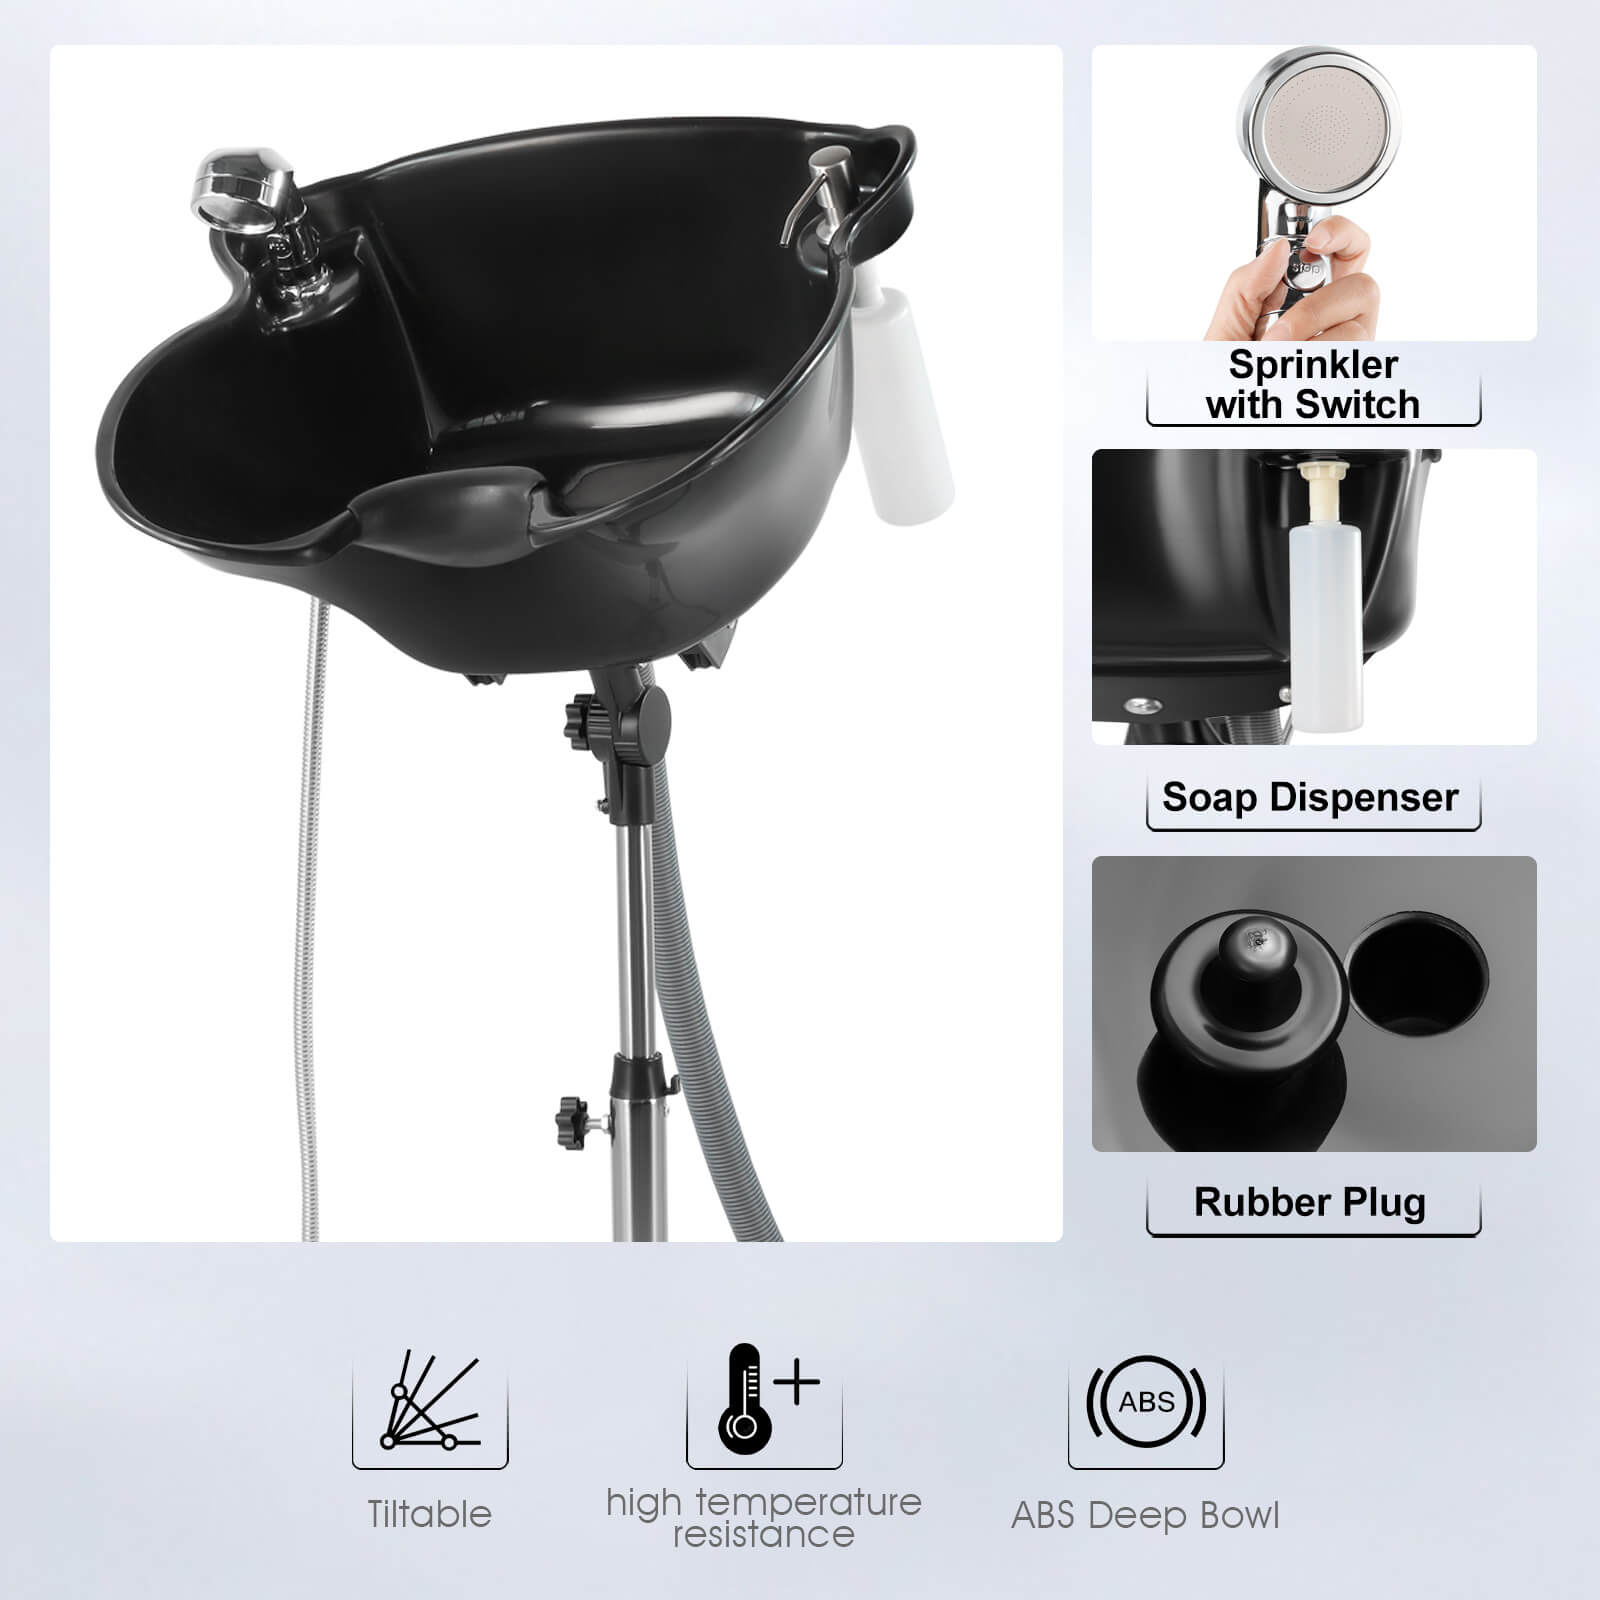 #1014 Shampoo Bowl Portable Salon Sink with Adjustable Height and Drain; Sprinkler with Switch Hair Washing Basin Barber Deep Bowl